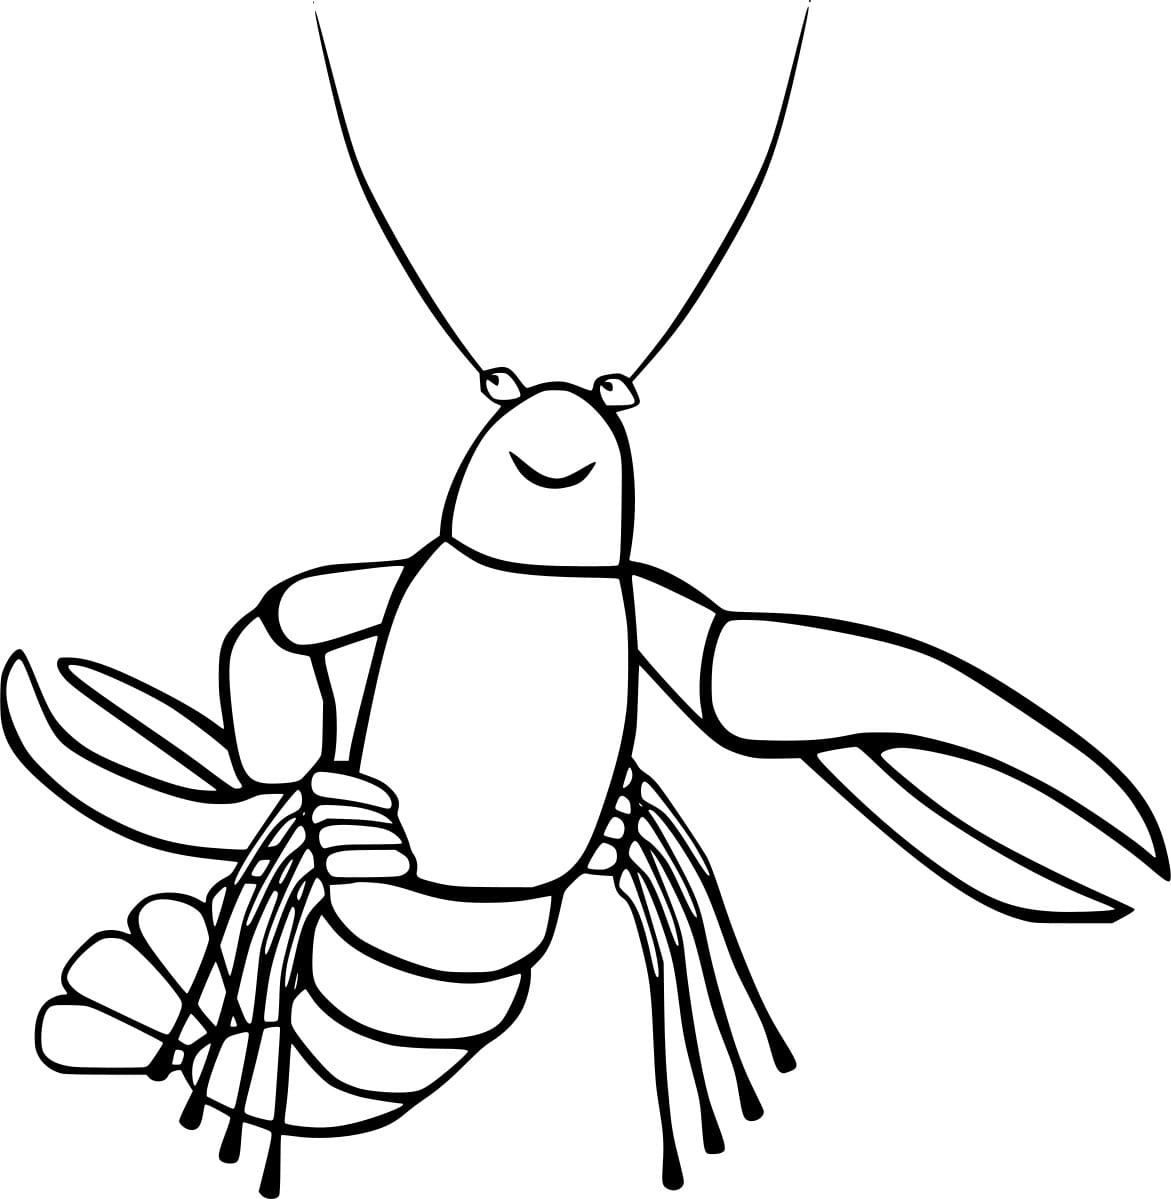 Leisurely Lobster Coloring Page